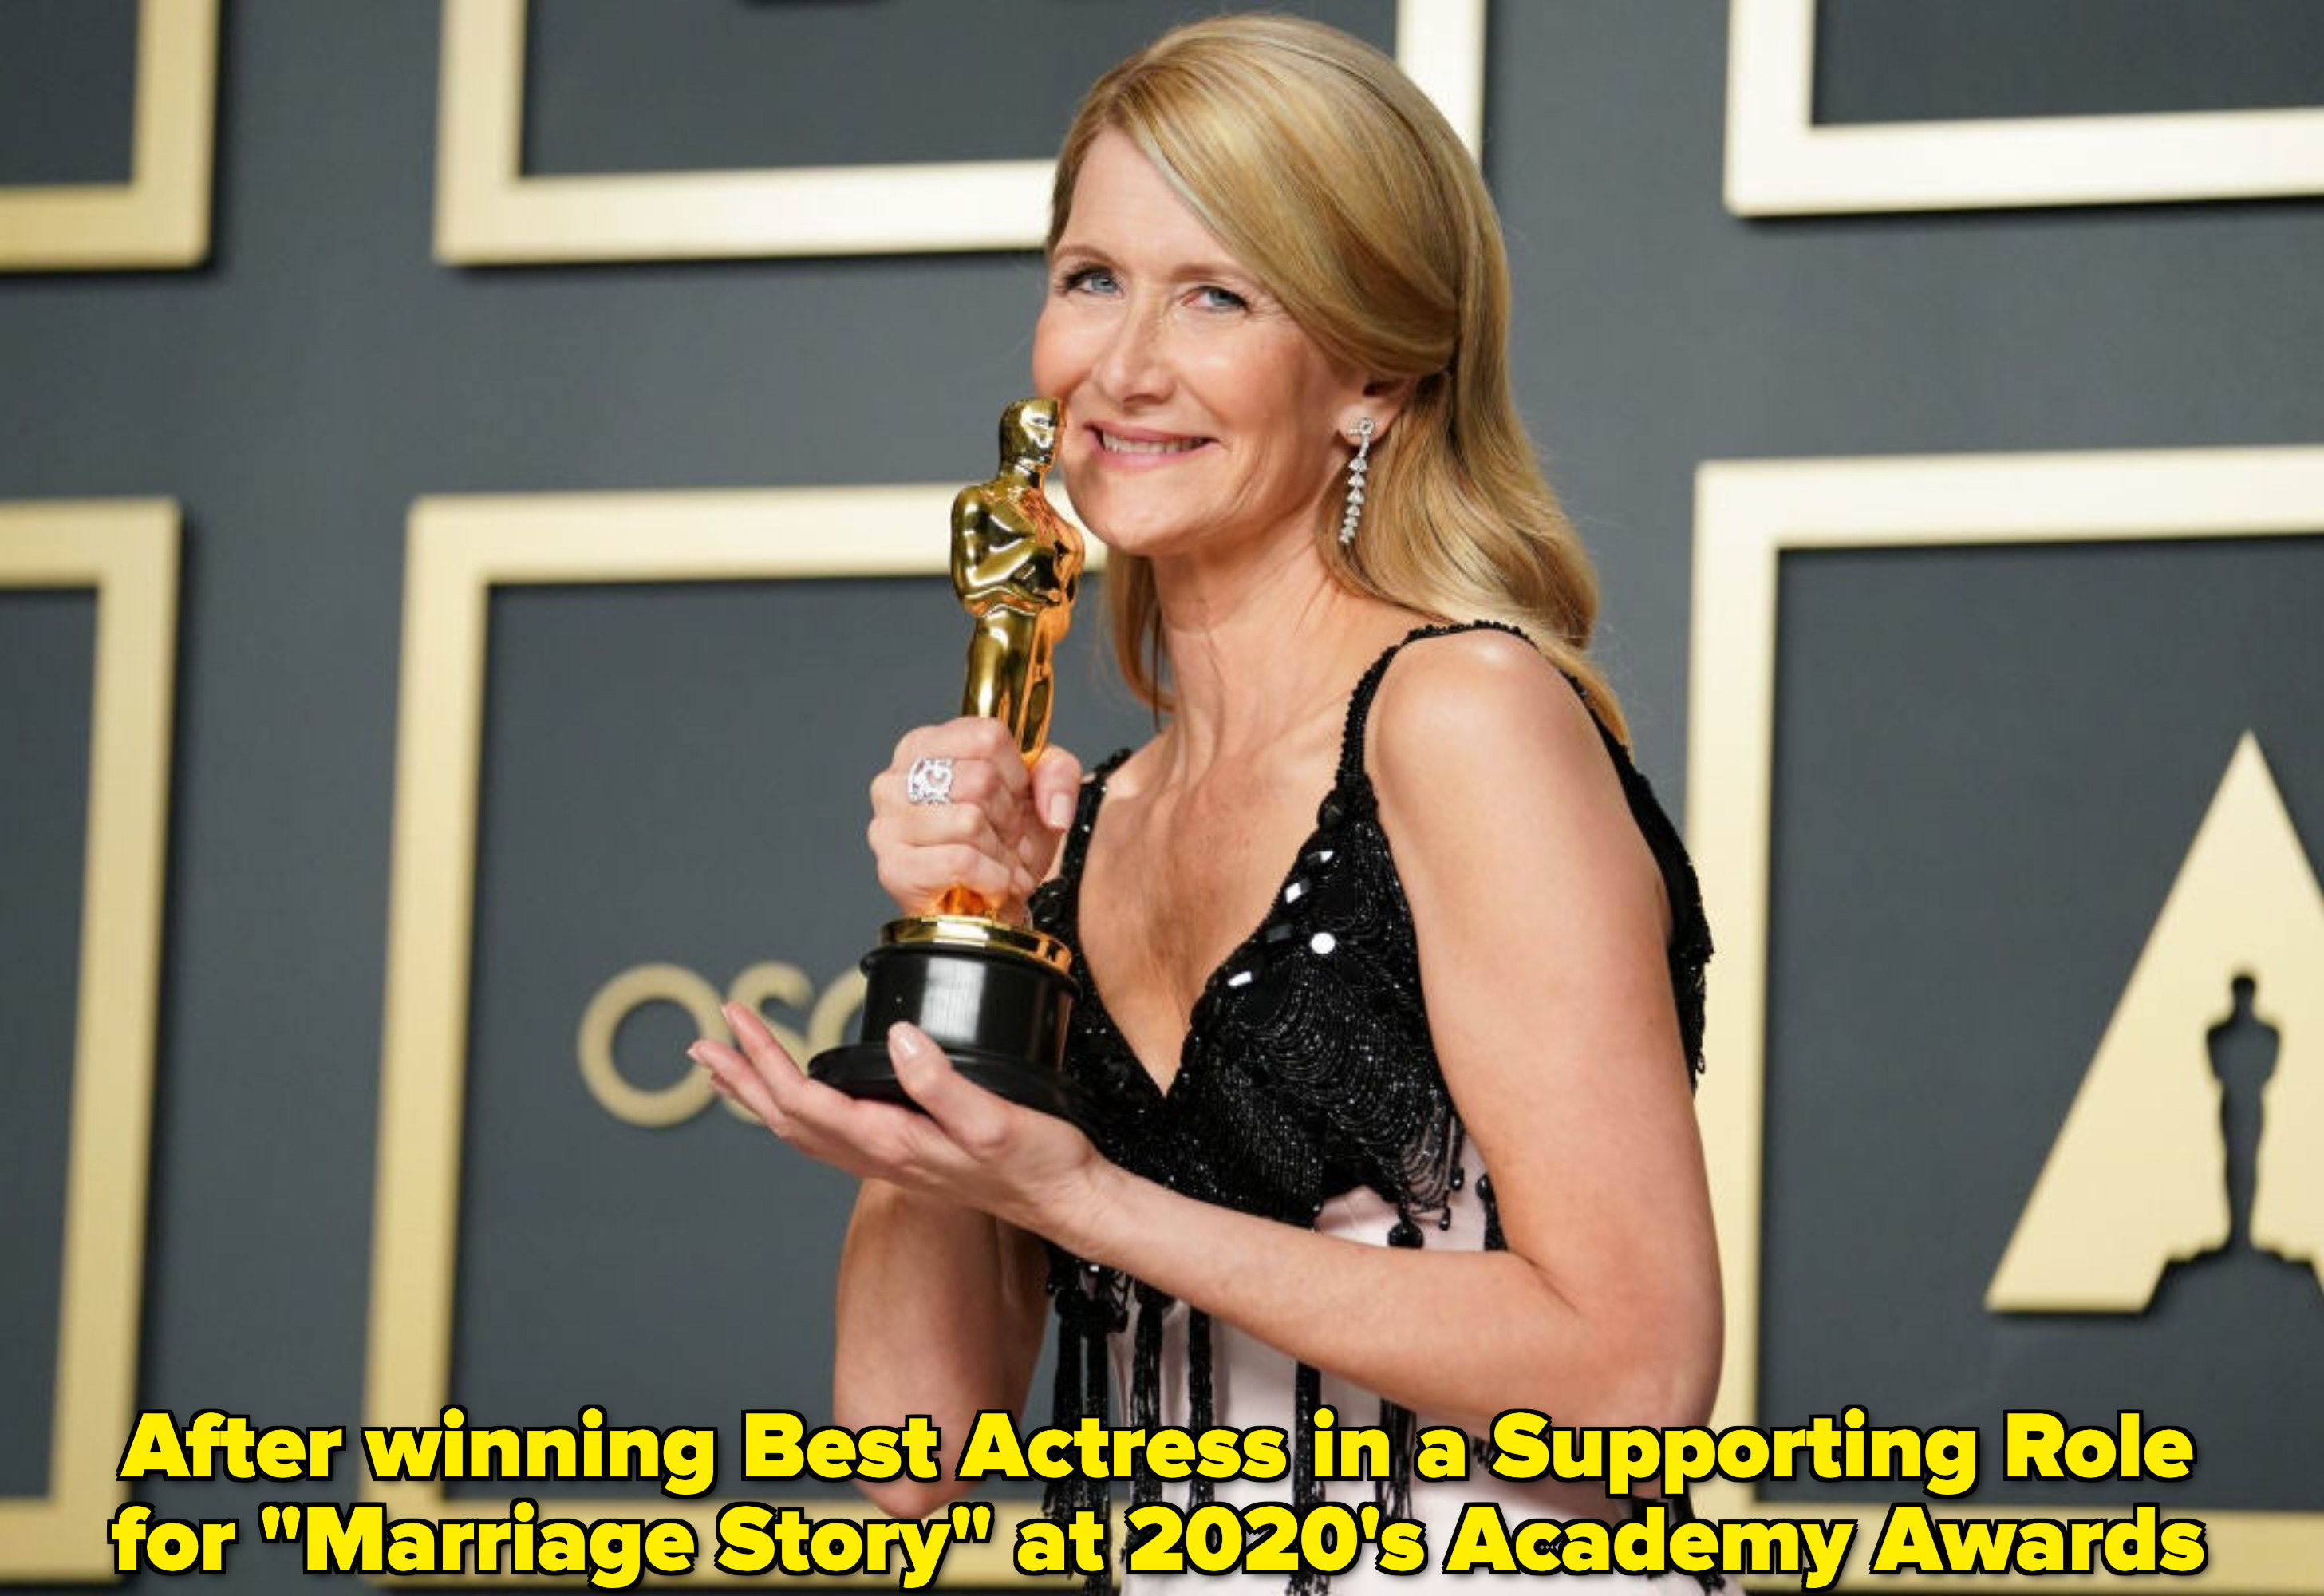 Laura Dern holding an Academy Award and smiling